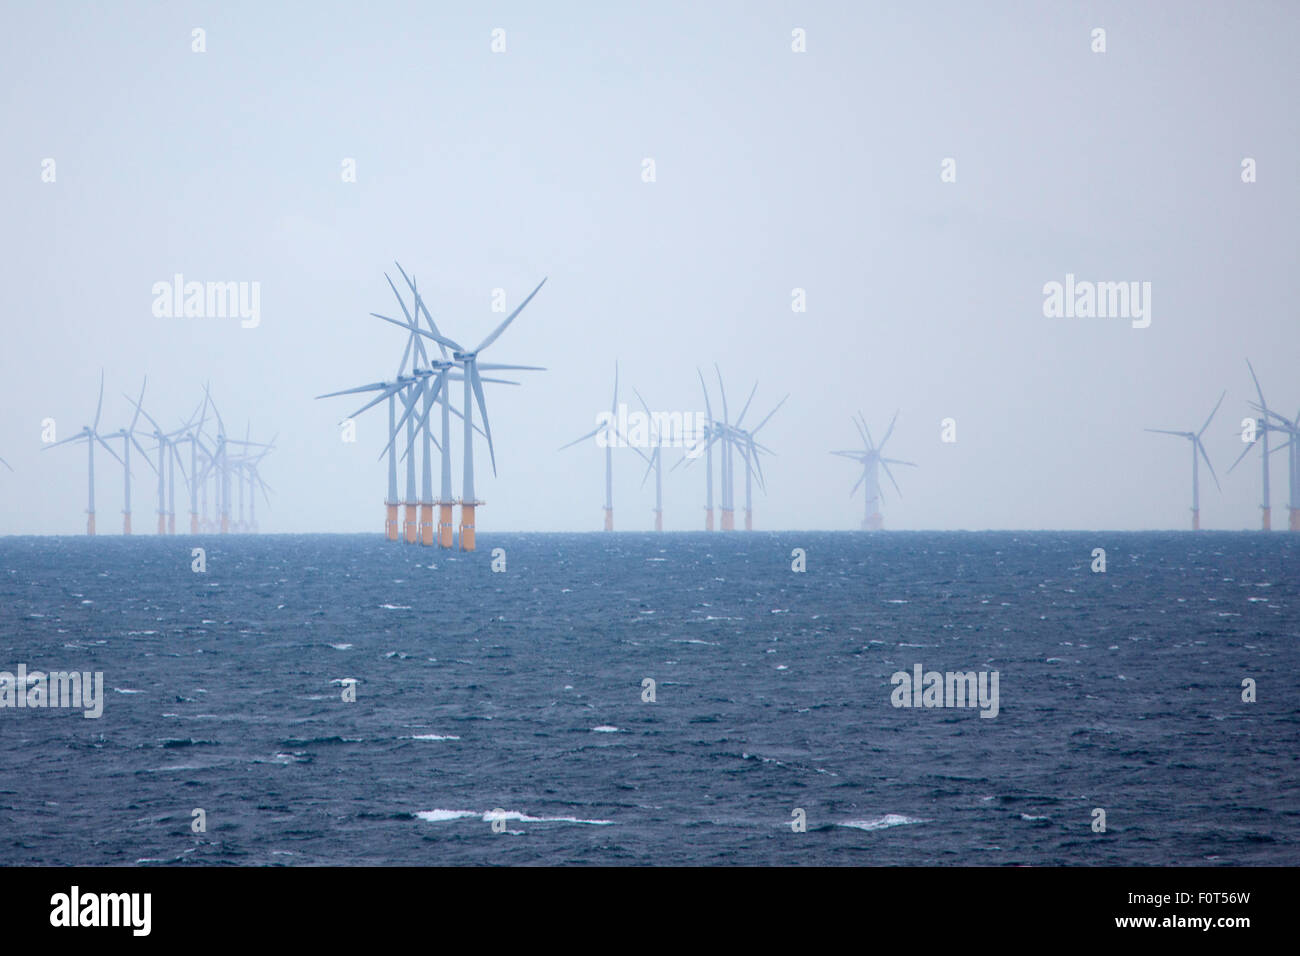 The Belwind Wind Farm located on Bligh Bank 29 miles from  Belgian port Zeebrugge in the North Sea Stock Photo